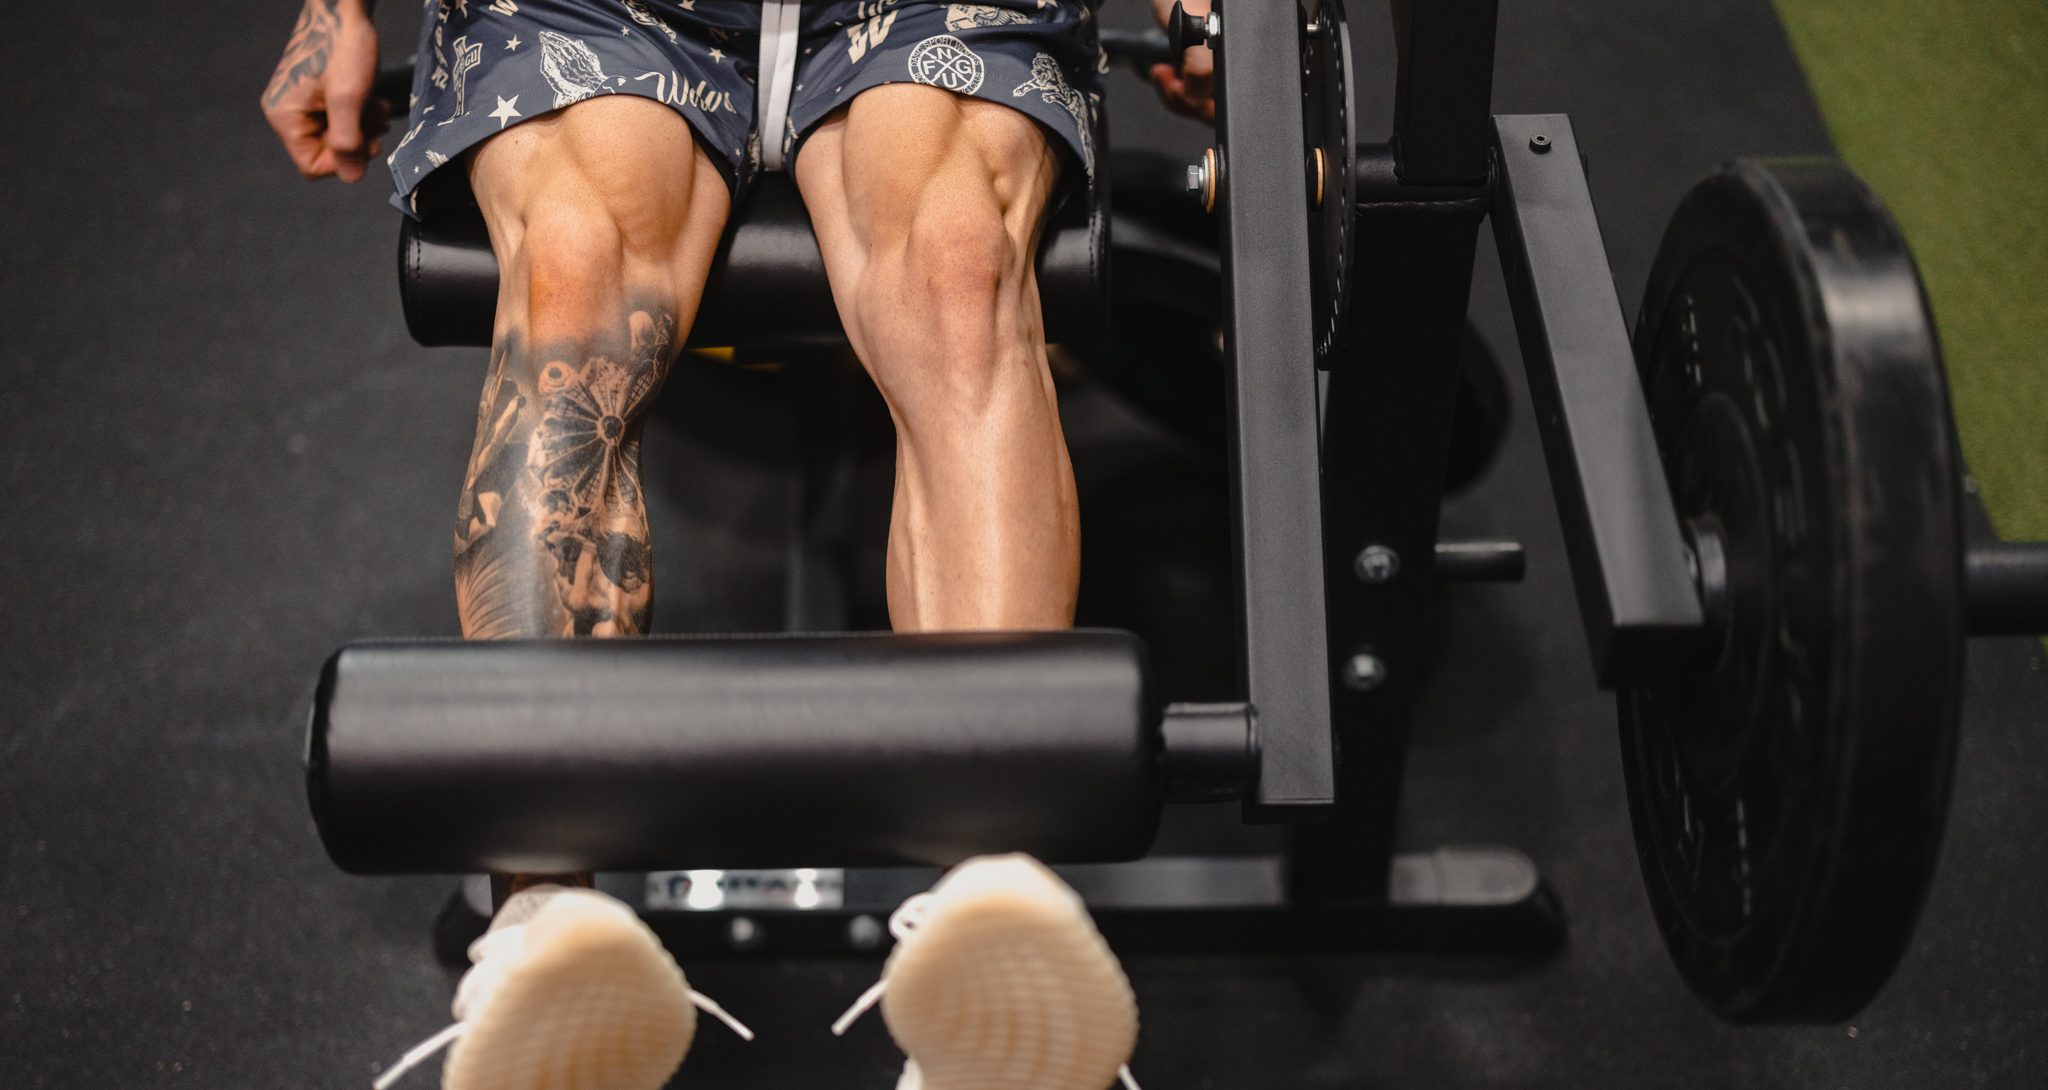 programming leg extensions and leg curls as an antagonist superset